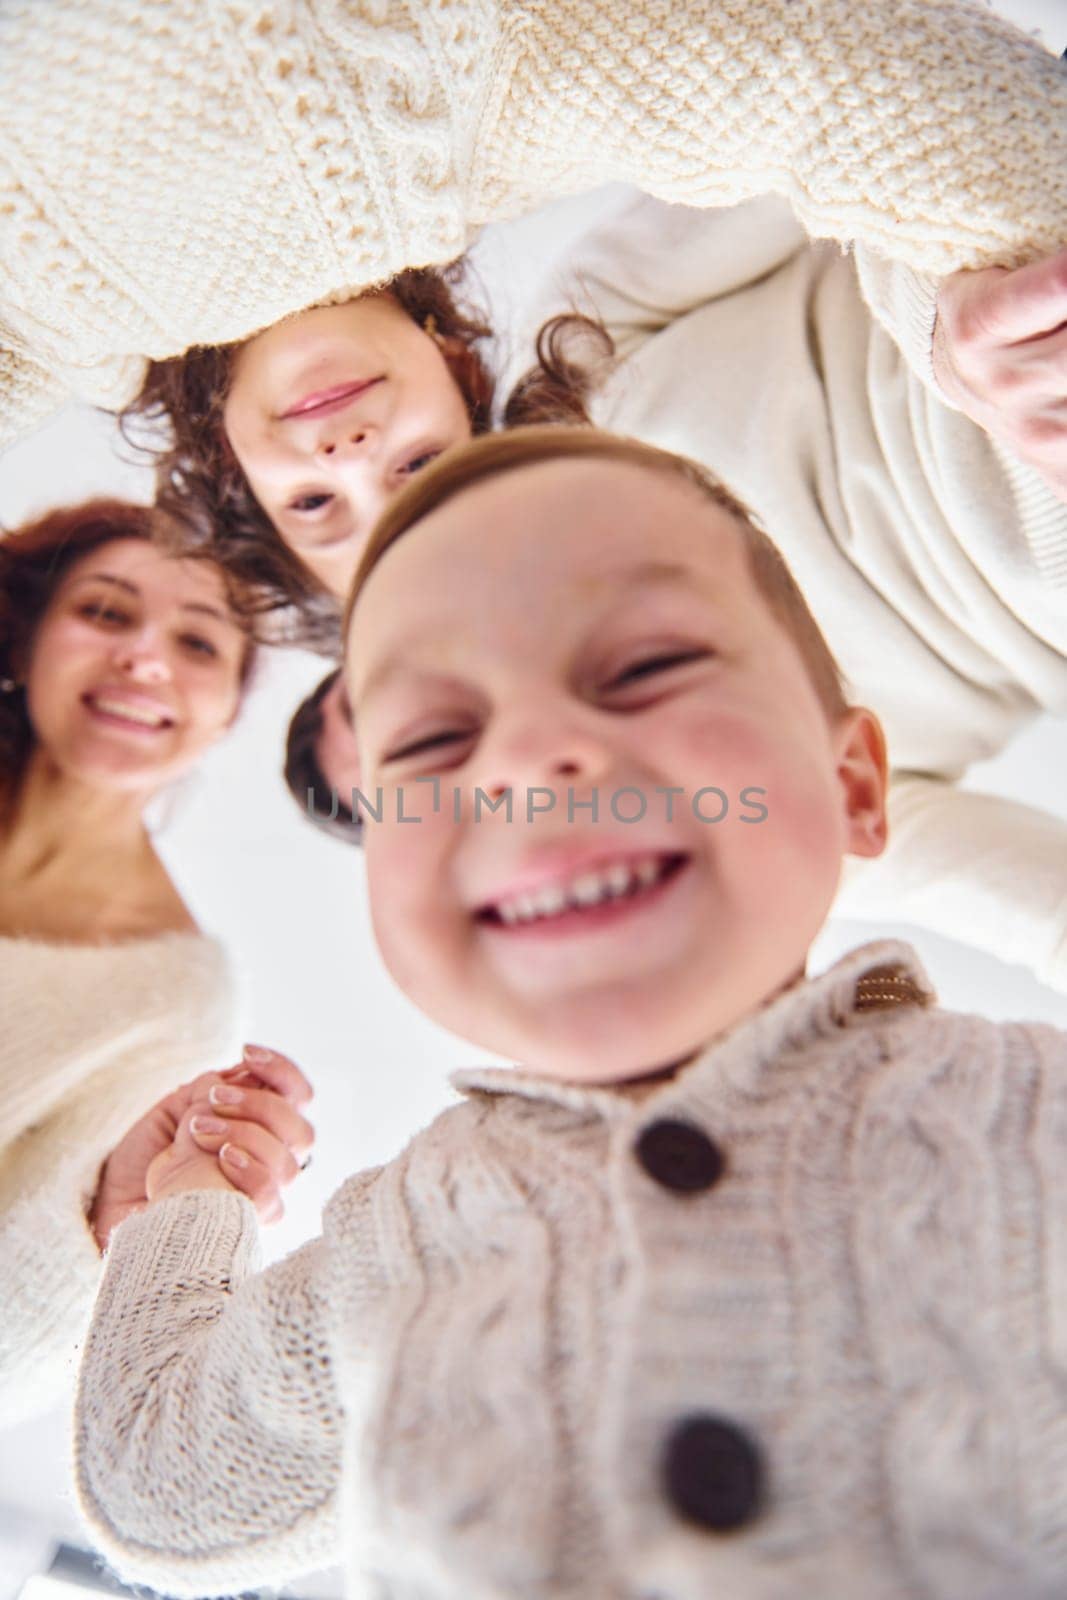 Smiling and having fun. View from below. Happy family looking down.